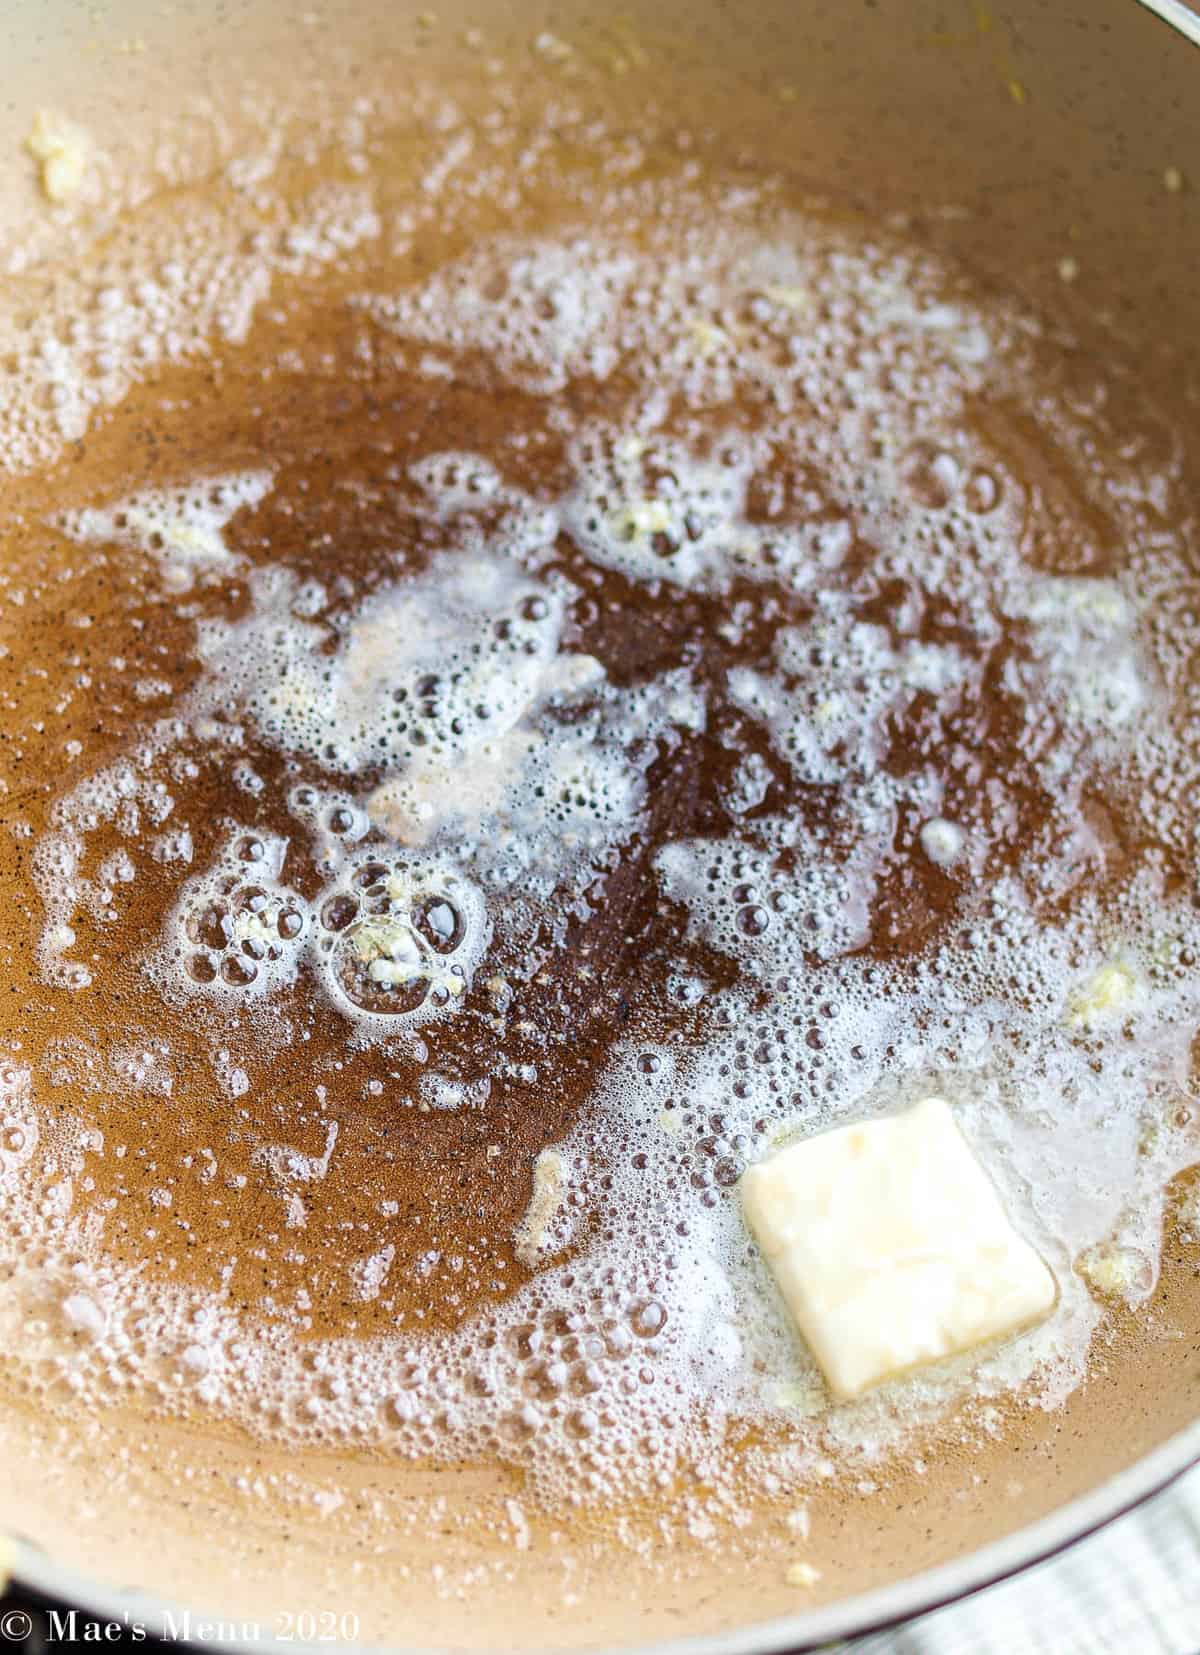 Melting butter in the non-stick pan